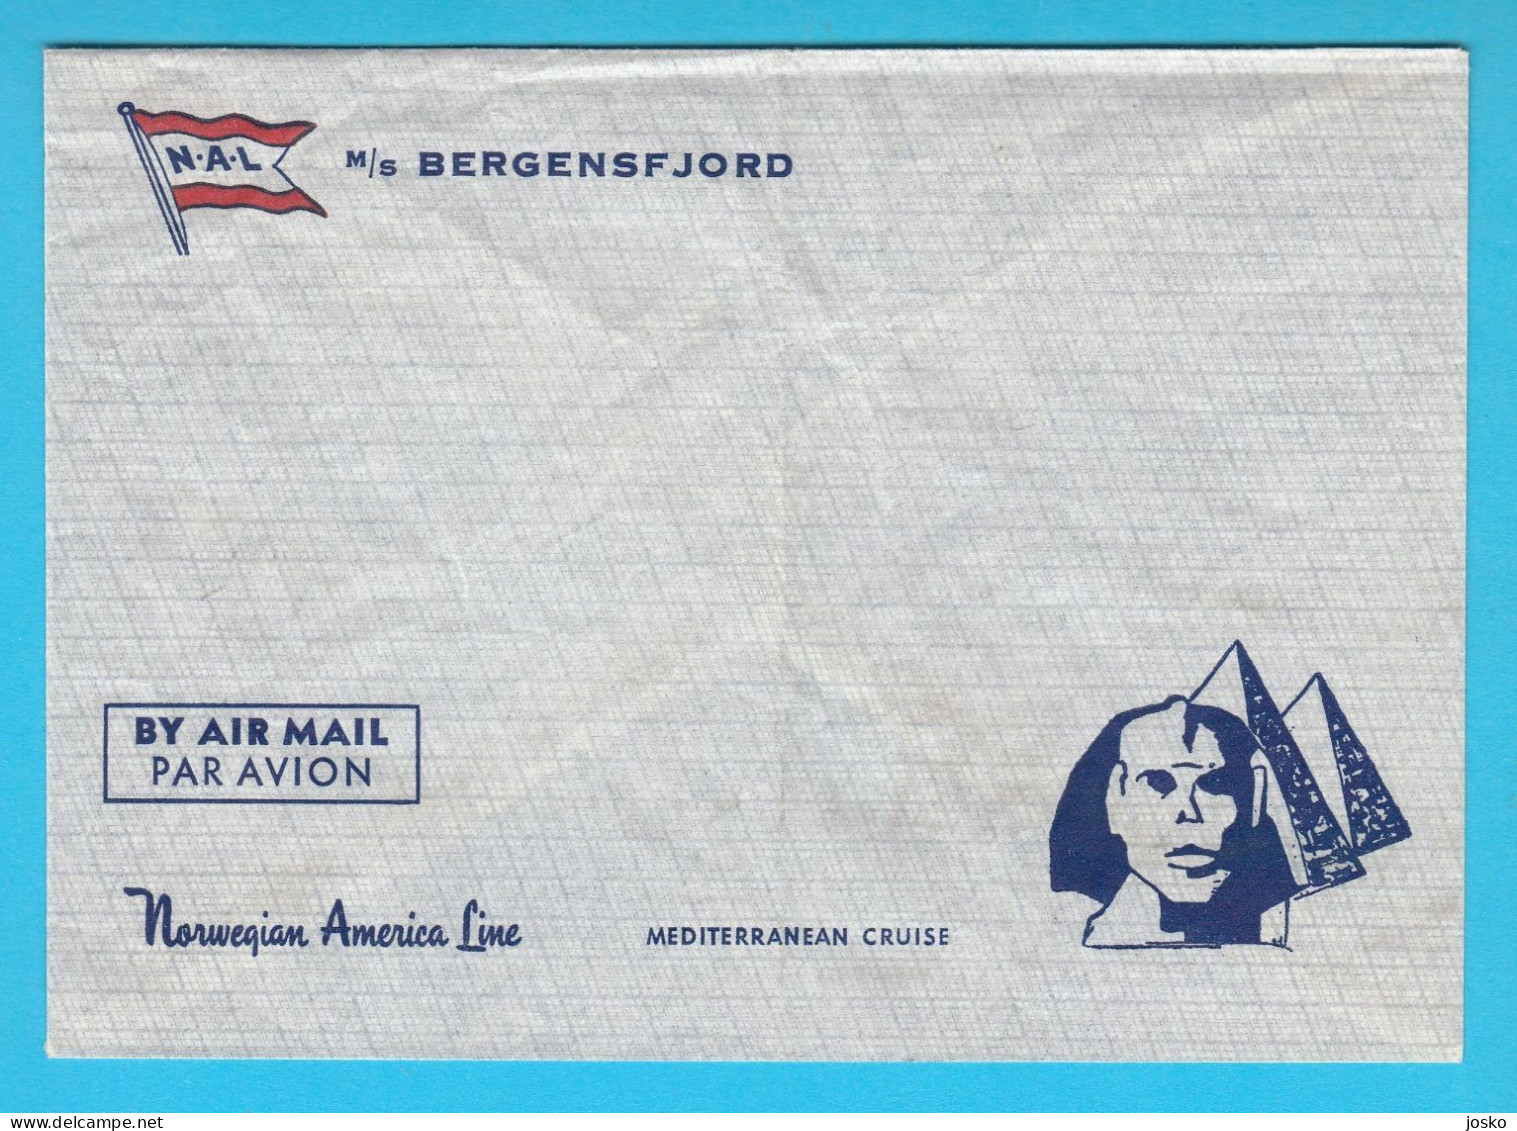 NORWEGIAN AMERICA LINE (Den Norske Amerikalinje) Ship M/S BERGENSFJORD * By Air Mail * Vintage Official Cover * Norway - Storia Postale